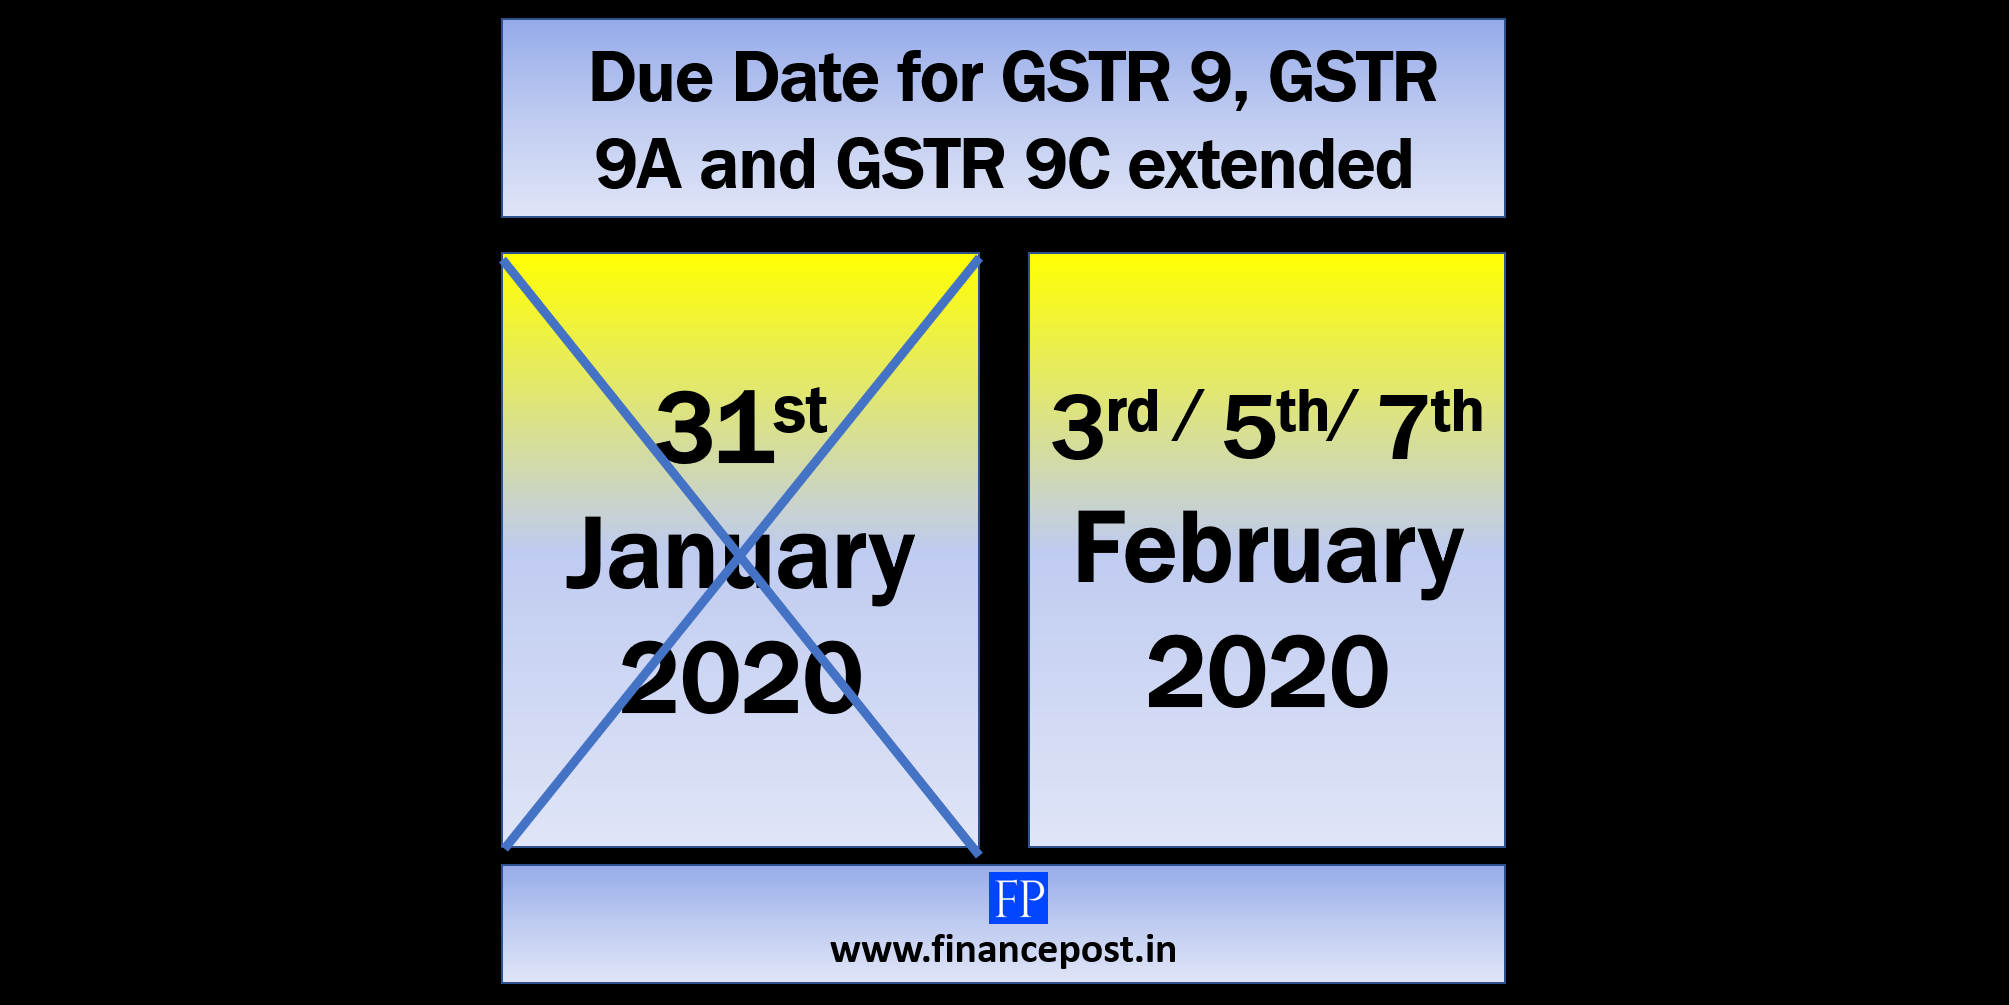 Due date for GST Annual Return & GST Audit extended